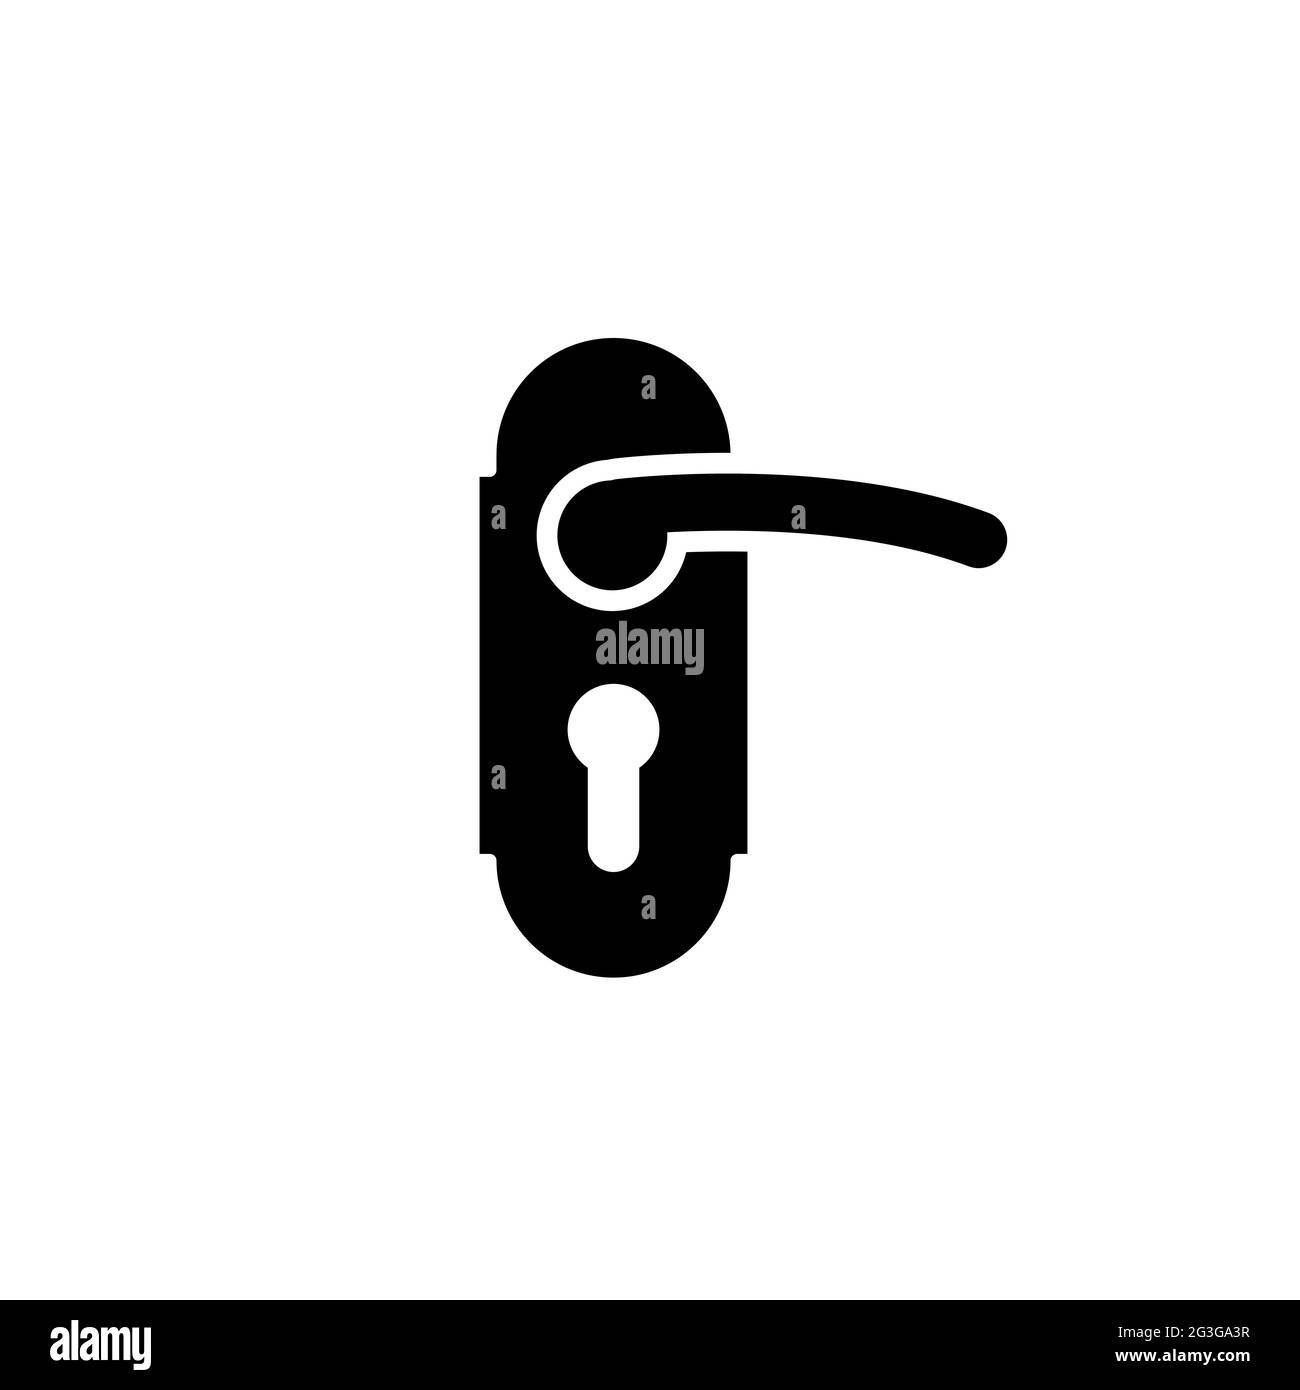 Doorknob with keyhole simple black icon for hotel on white Stock Vector